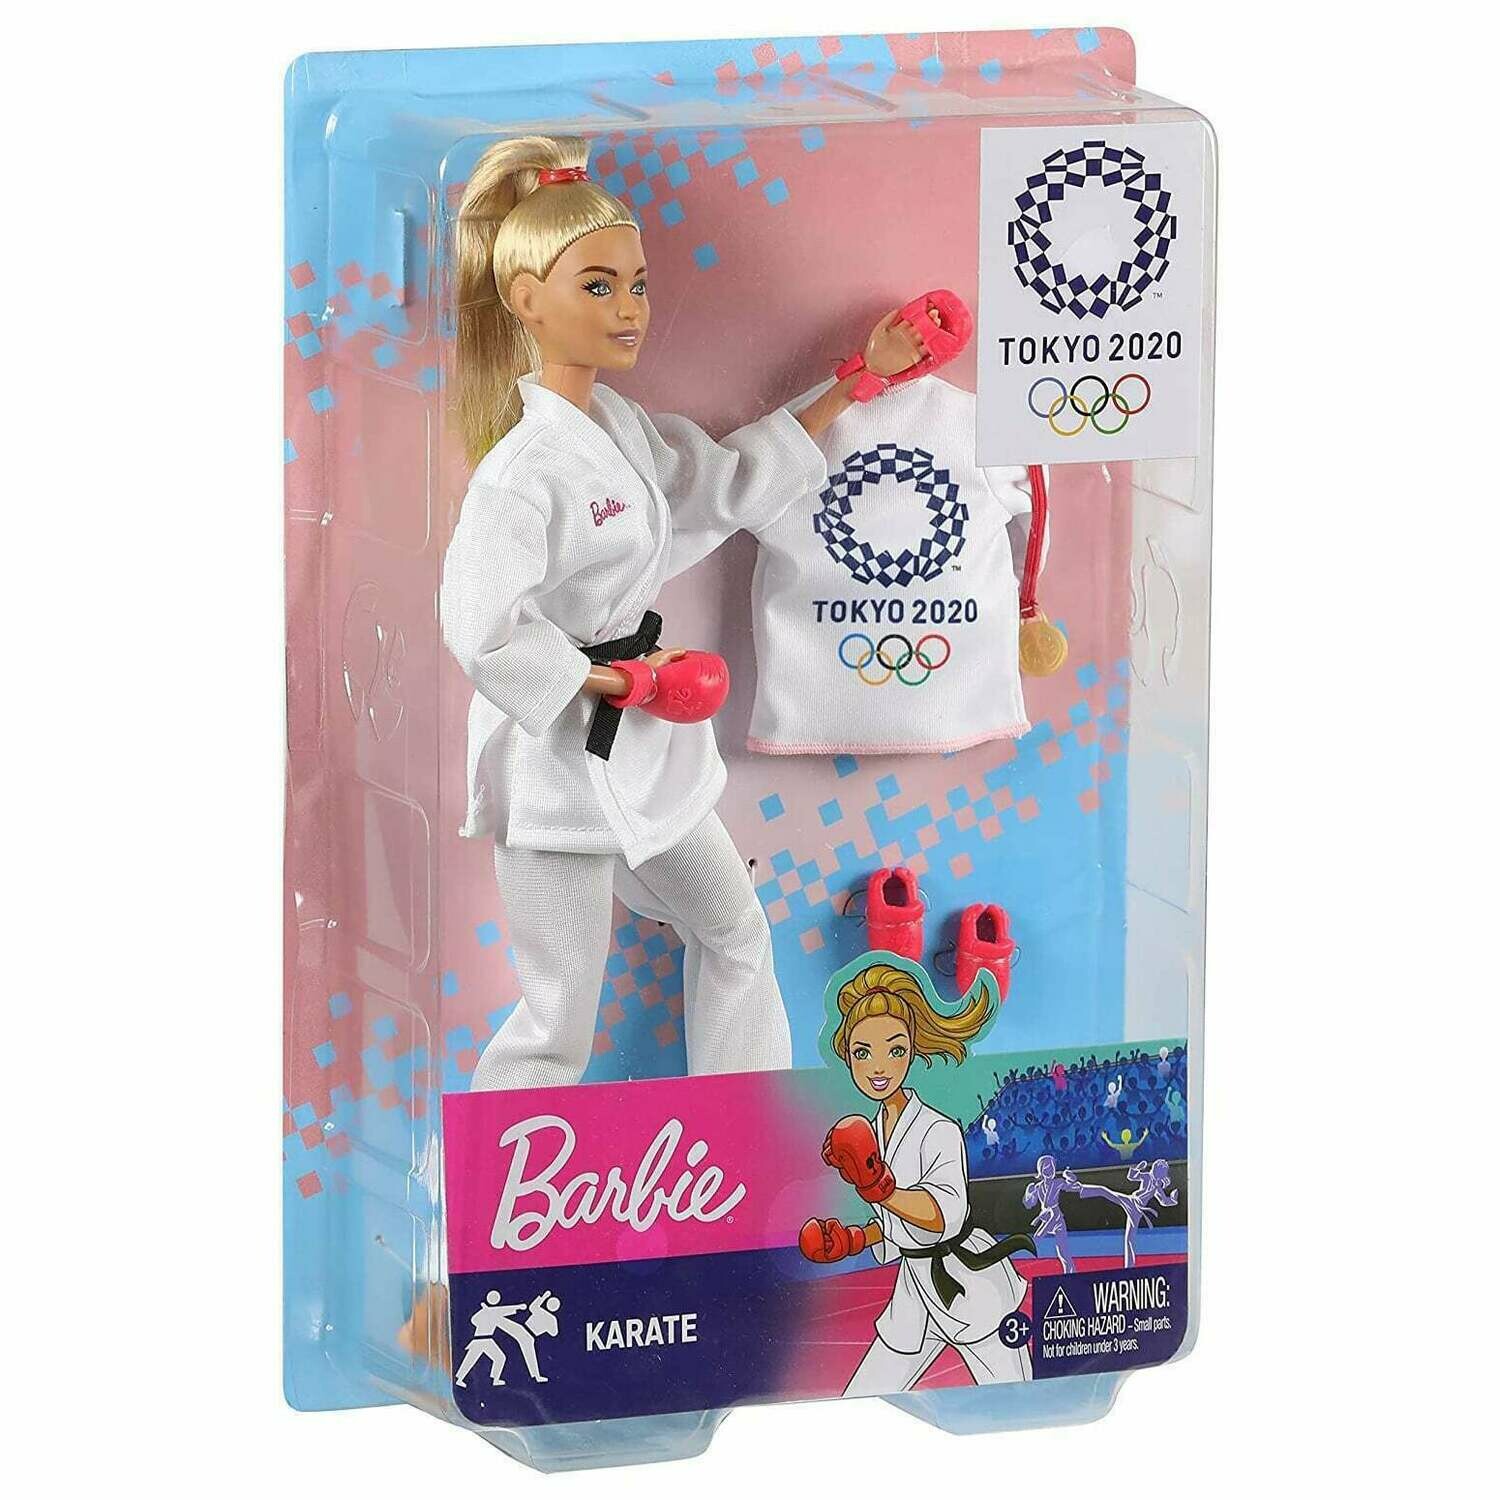 2020 Limited Edition Official Tokyo Olympic Games Karate Barbie Doll